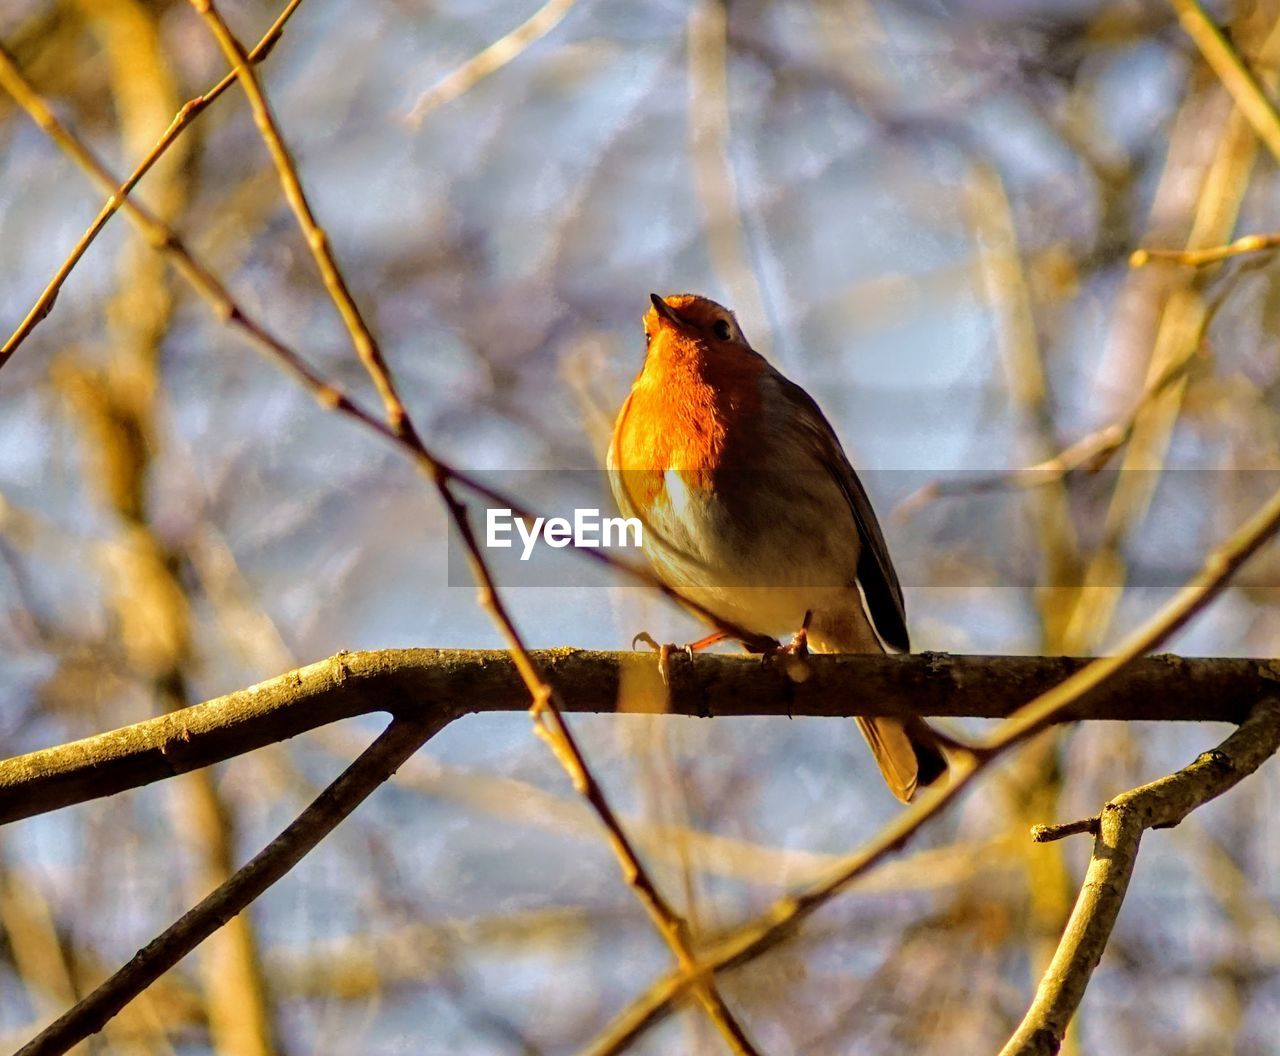 nature, bird, animal themes, animal, animal wildlife, wildlife, perching, one animal, yellow, branch, tree, robin, plant, beak, no people, autumn, outdoors, leaf, beauty in nature, focus on foreground, close-up, flower, day